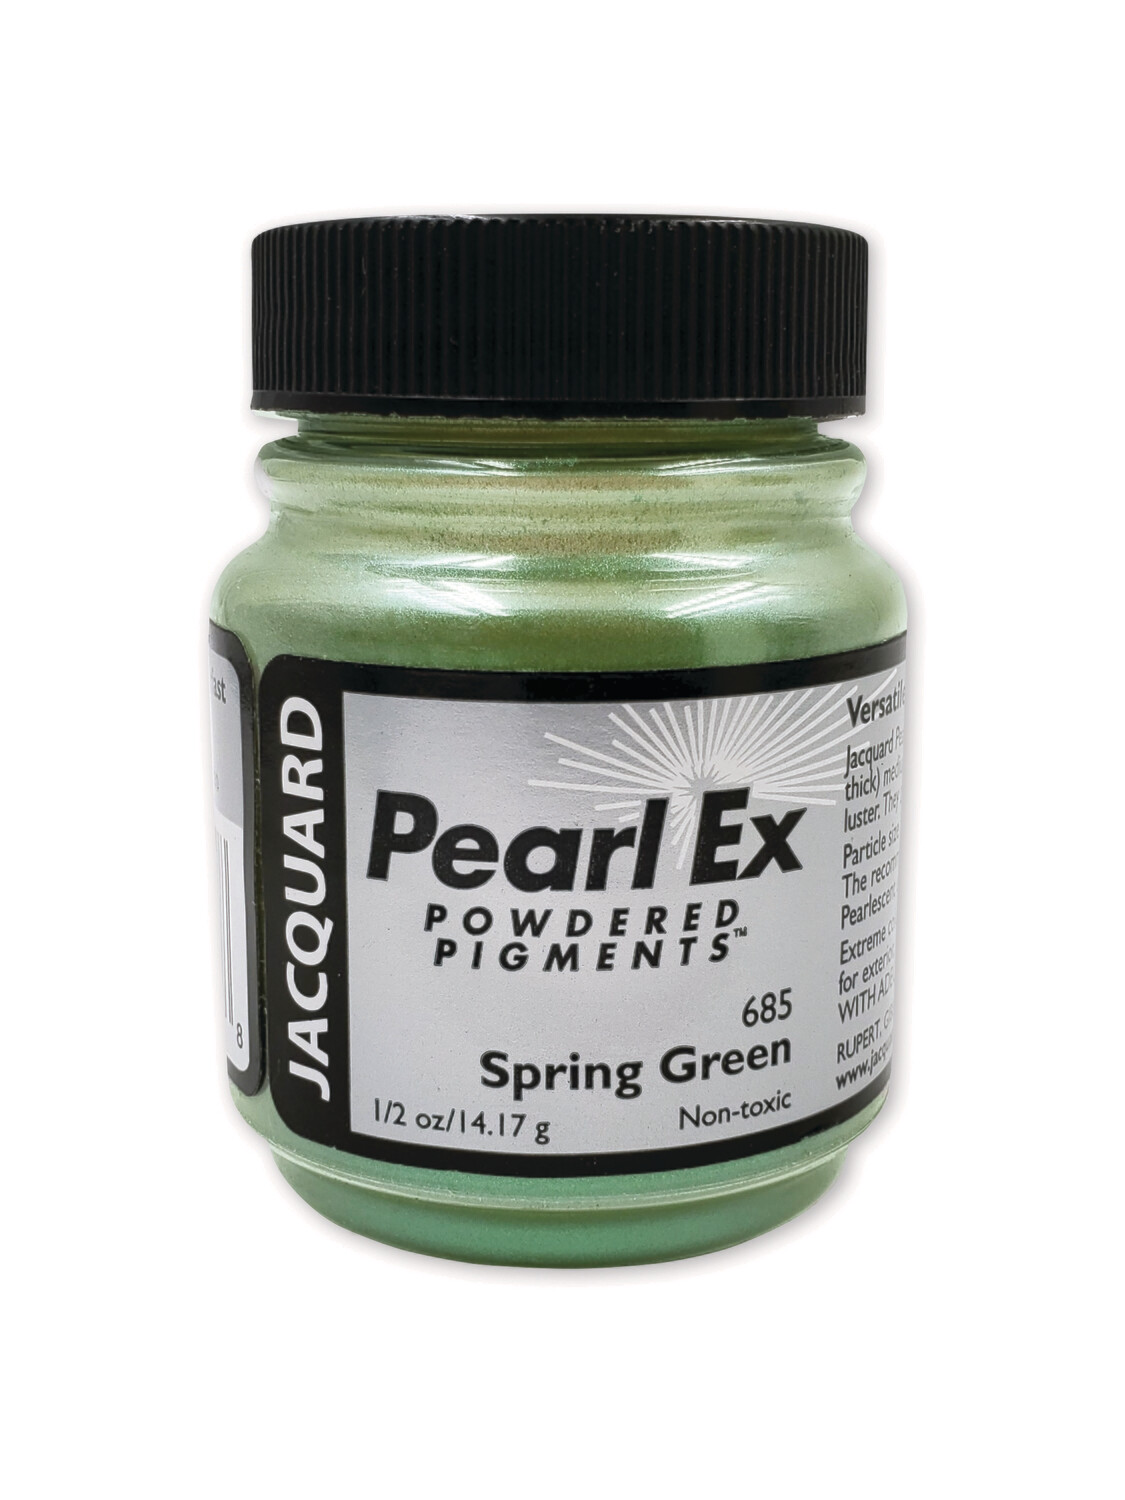 Pearl Ex Powdered Pigments-Spring Green